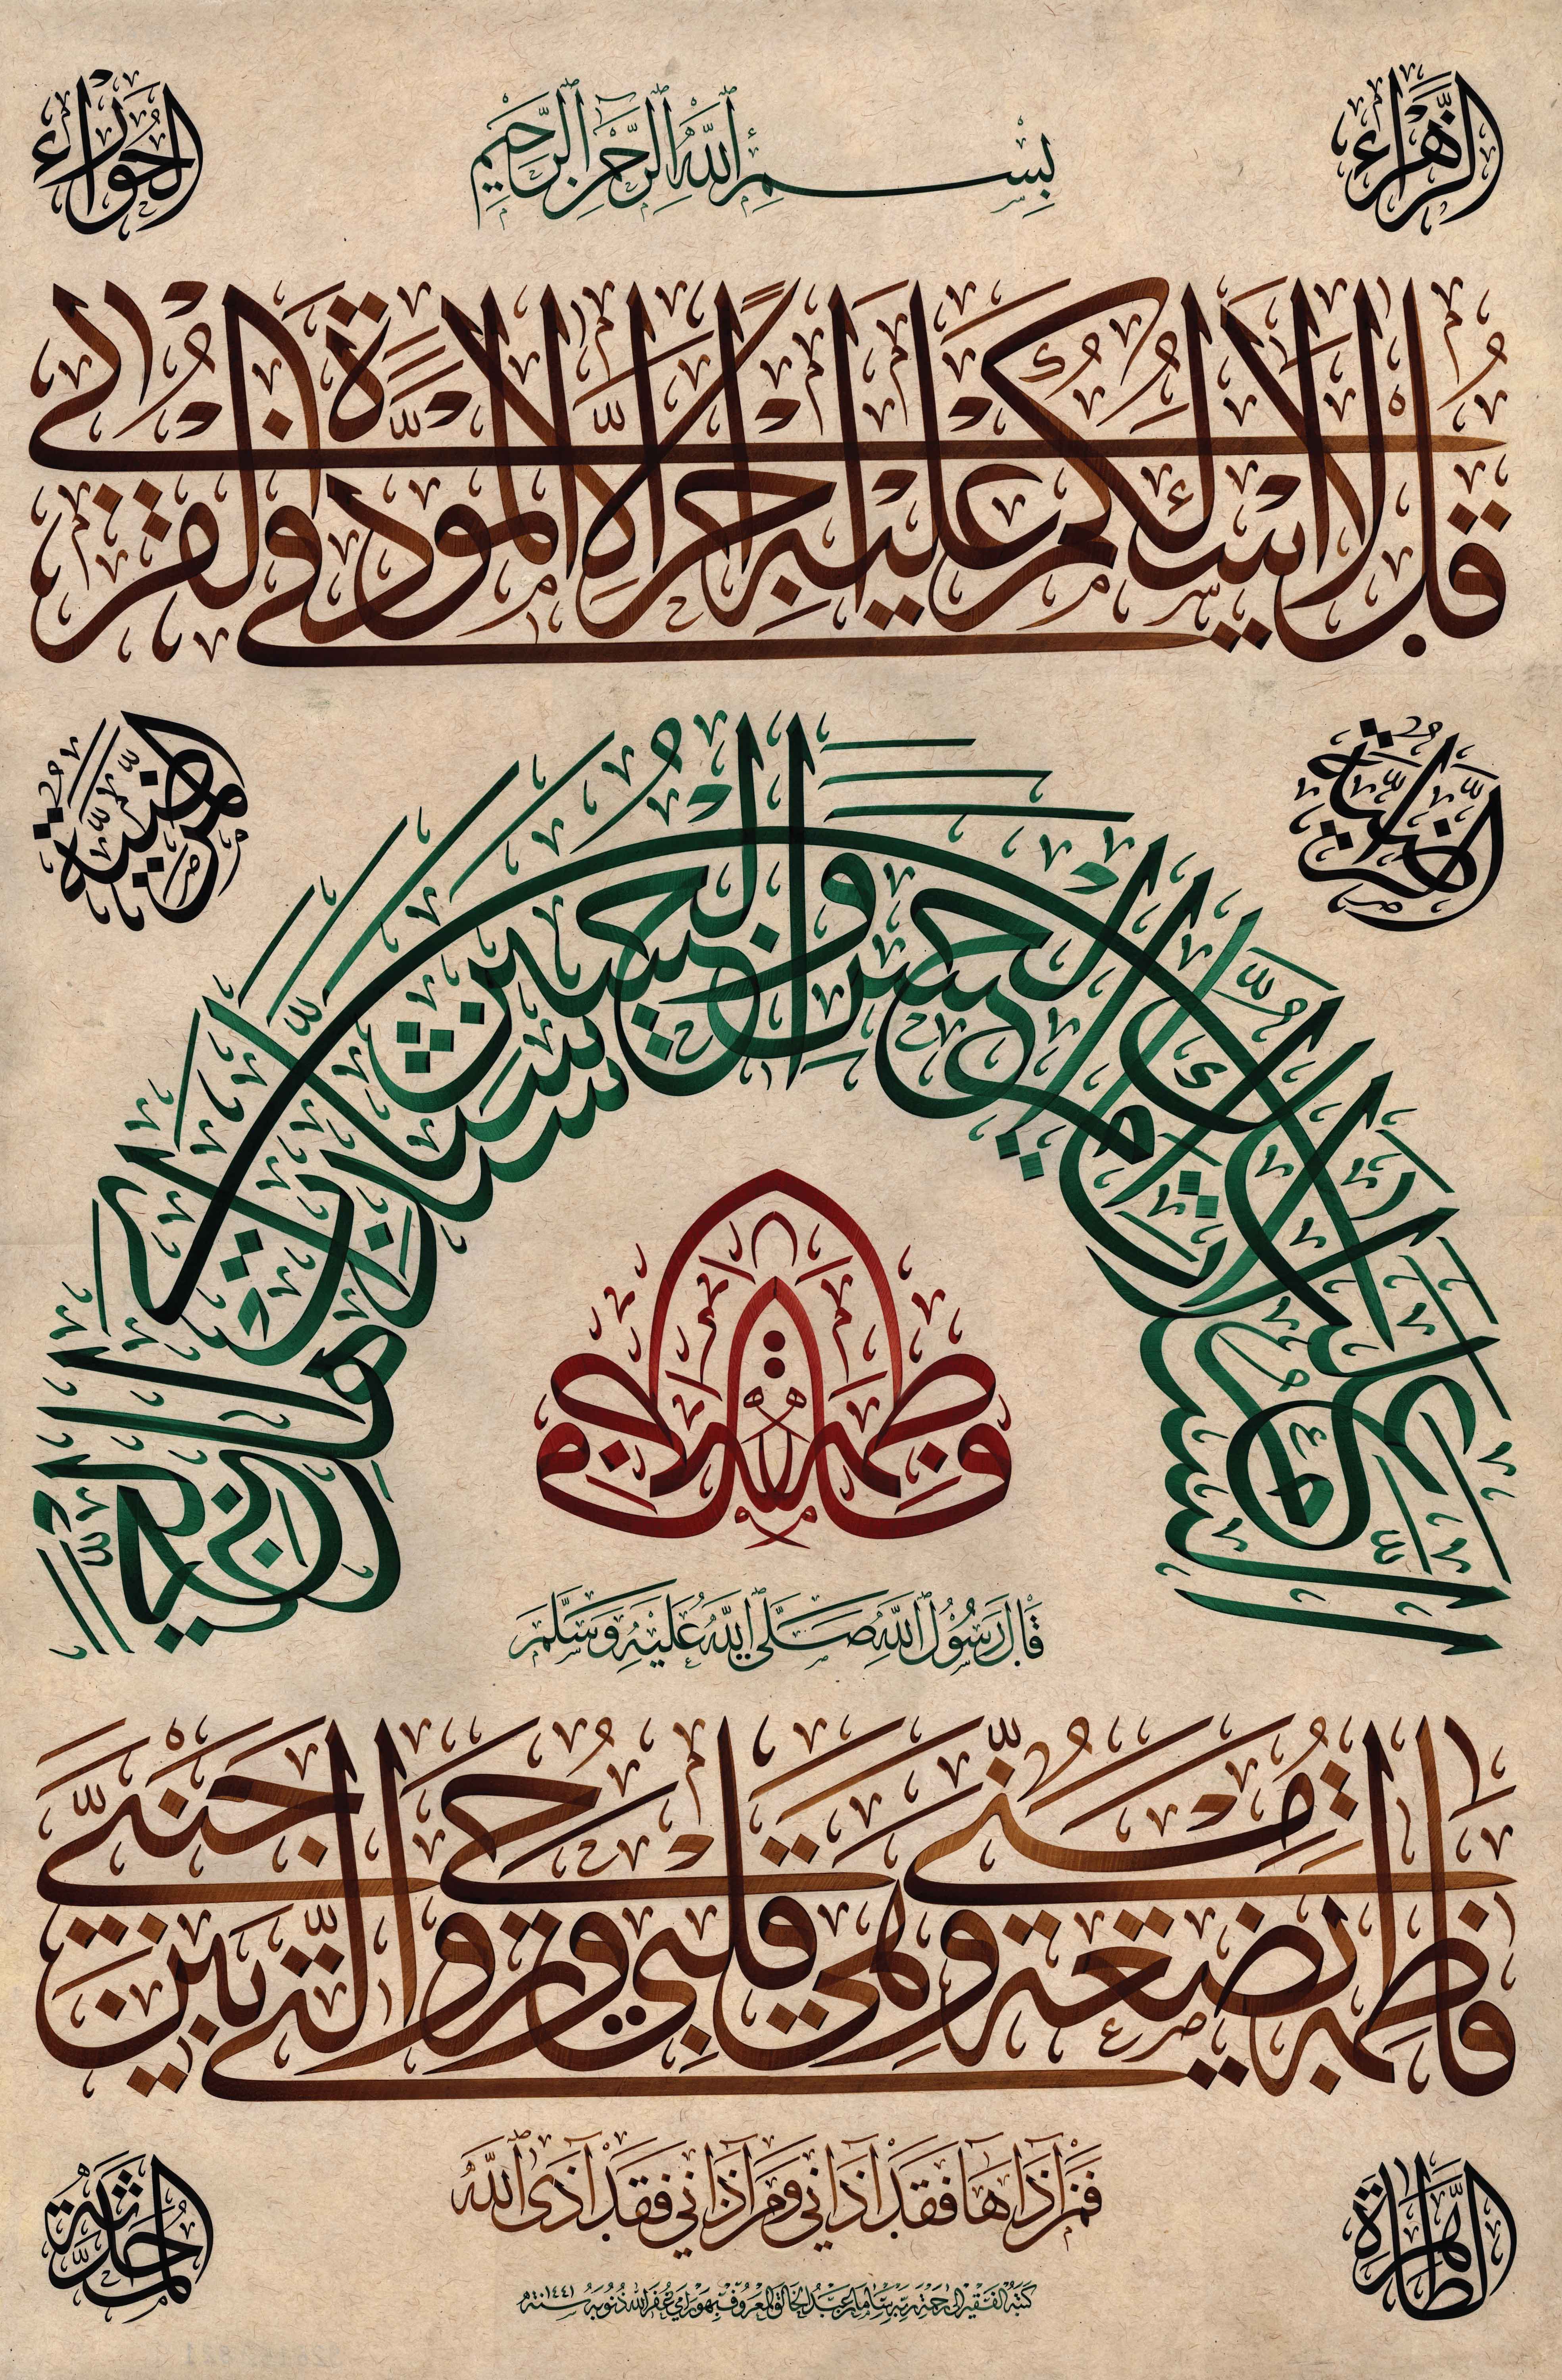 The winners of the appreciation award in the brief-text section written in Thuluth font